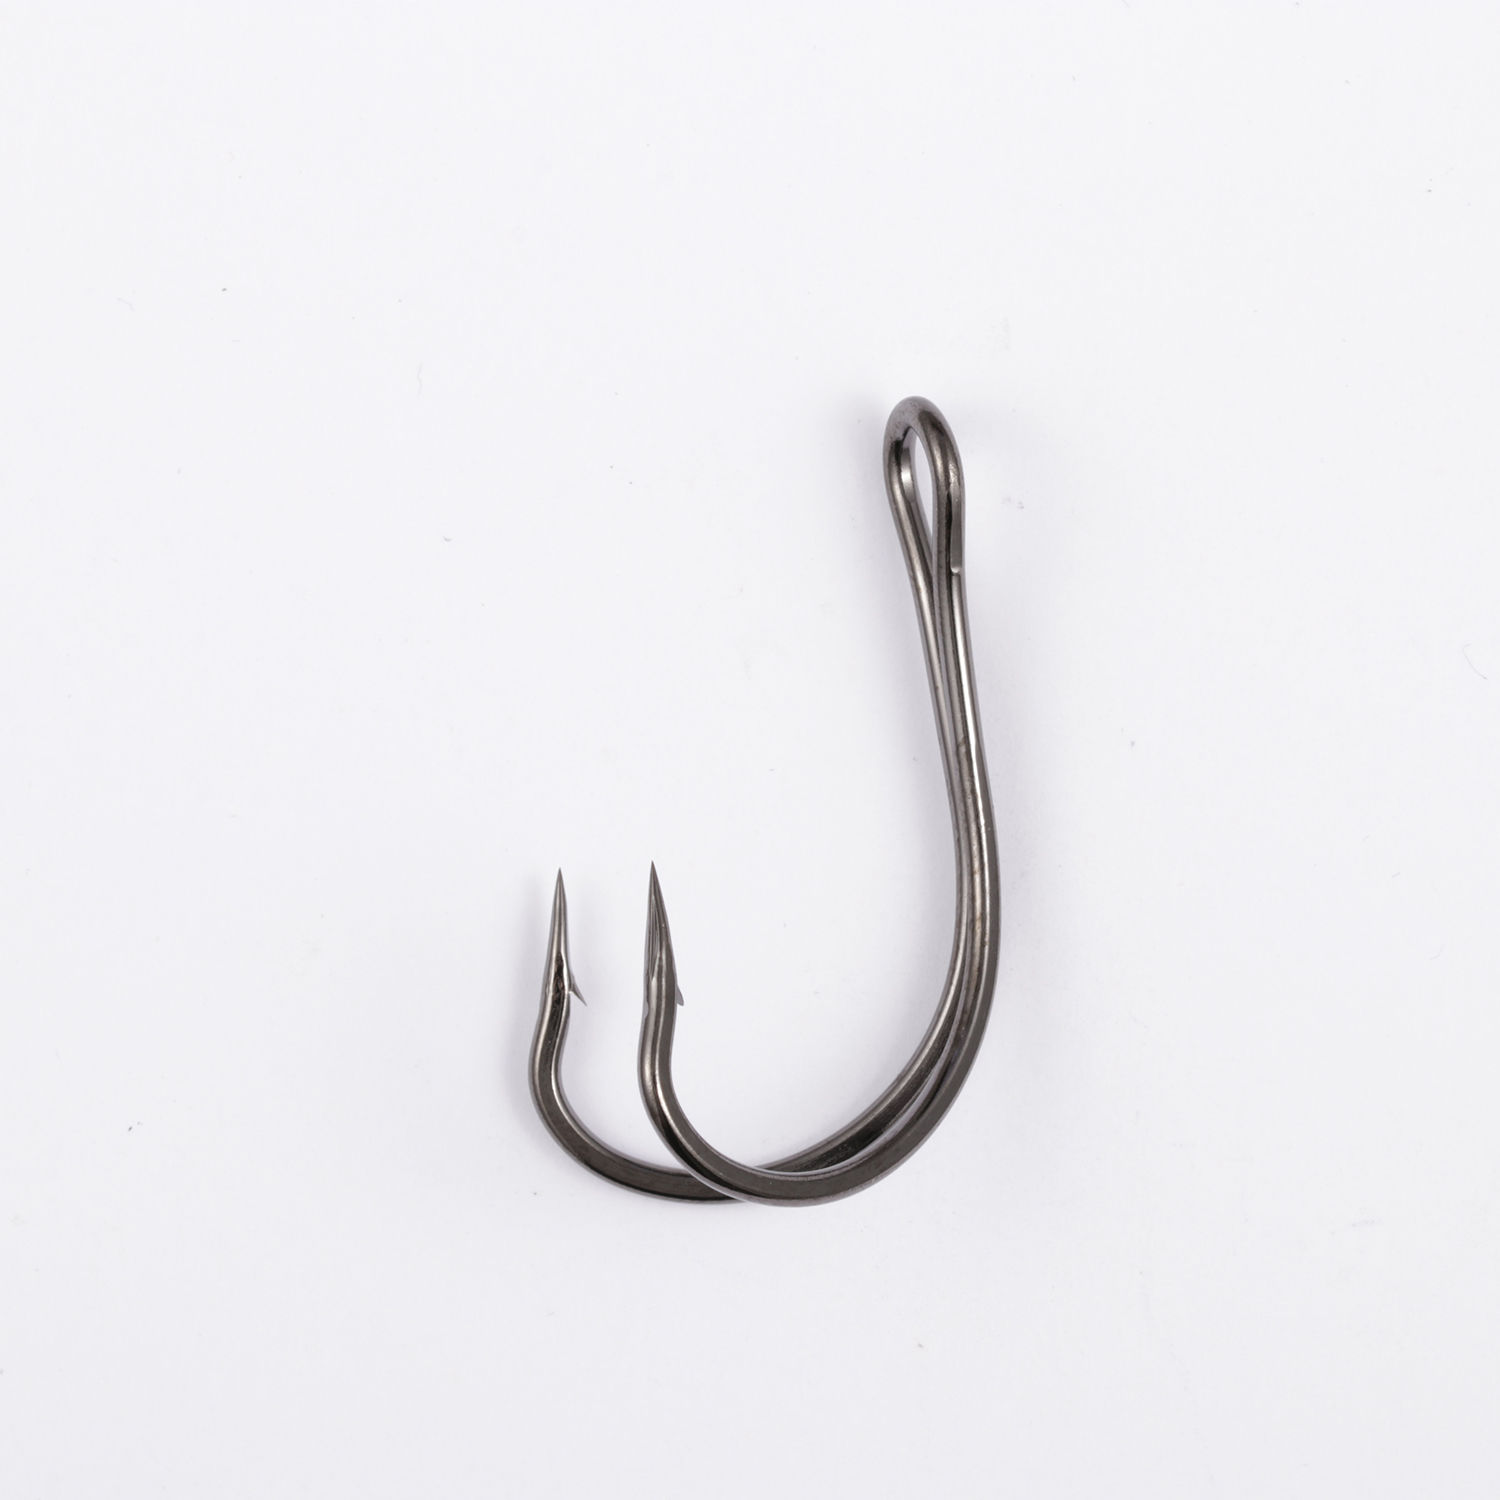 China factory Outlets for Fish N Hook Lure - L13001 DOUBLE HOOK